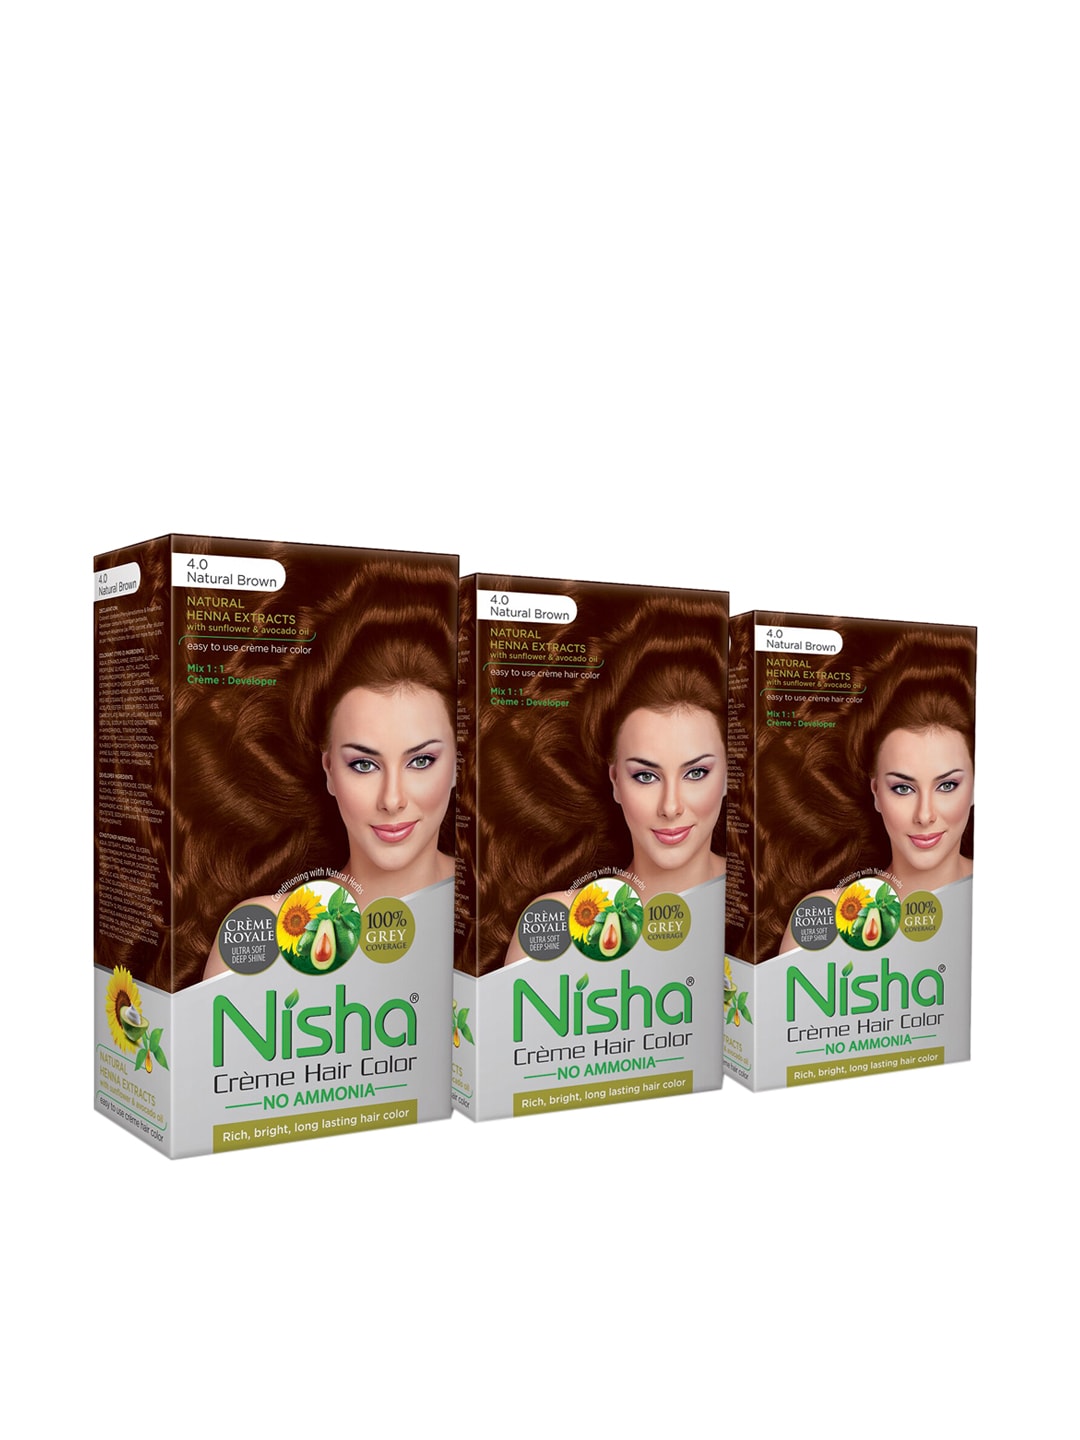 Nisha Unisex Pack of 2 Creme Hair Color 120gm each- Natural Brown Price in India